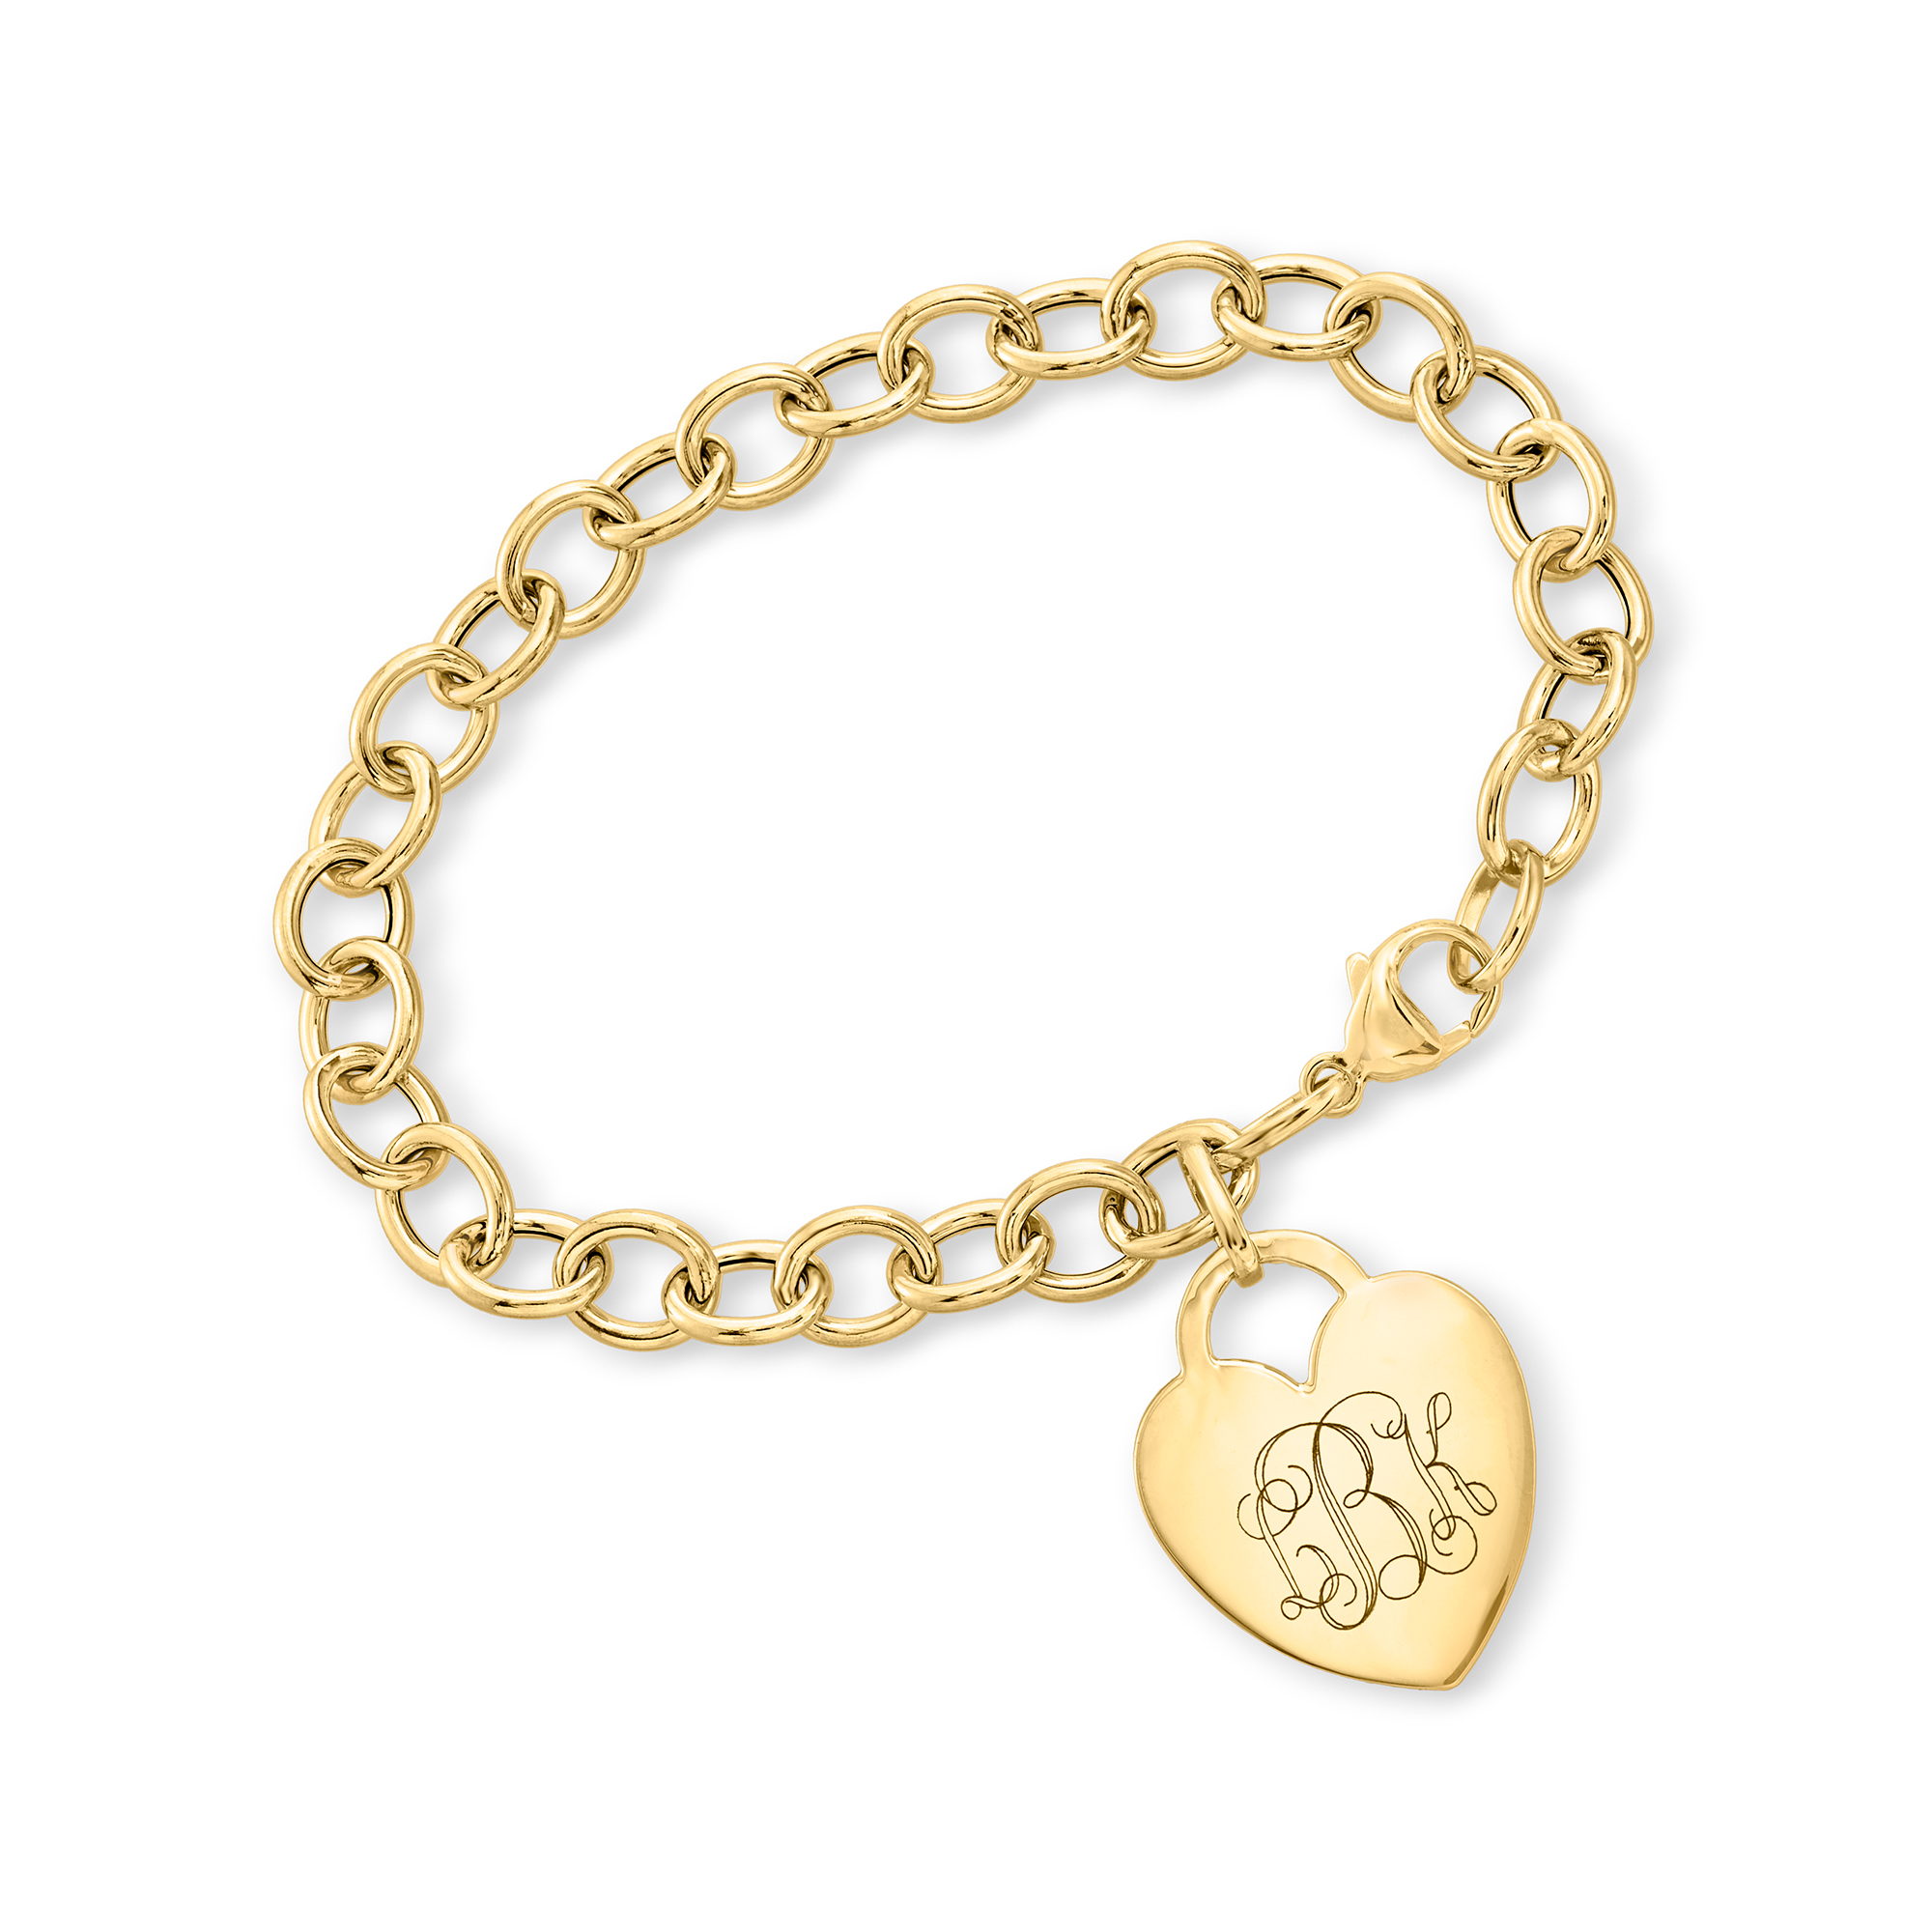 Rose-Gold Plated Charm Bracelet with Classic Heart Design White / Rose Gold